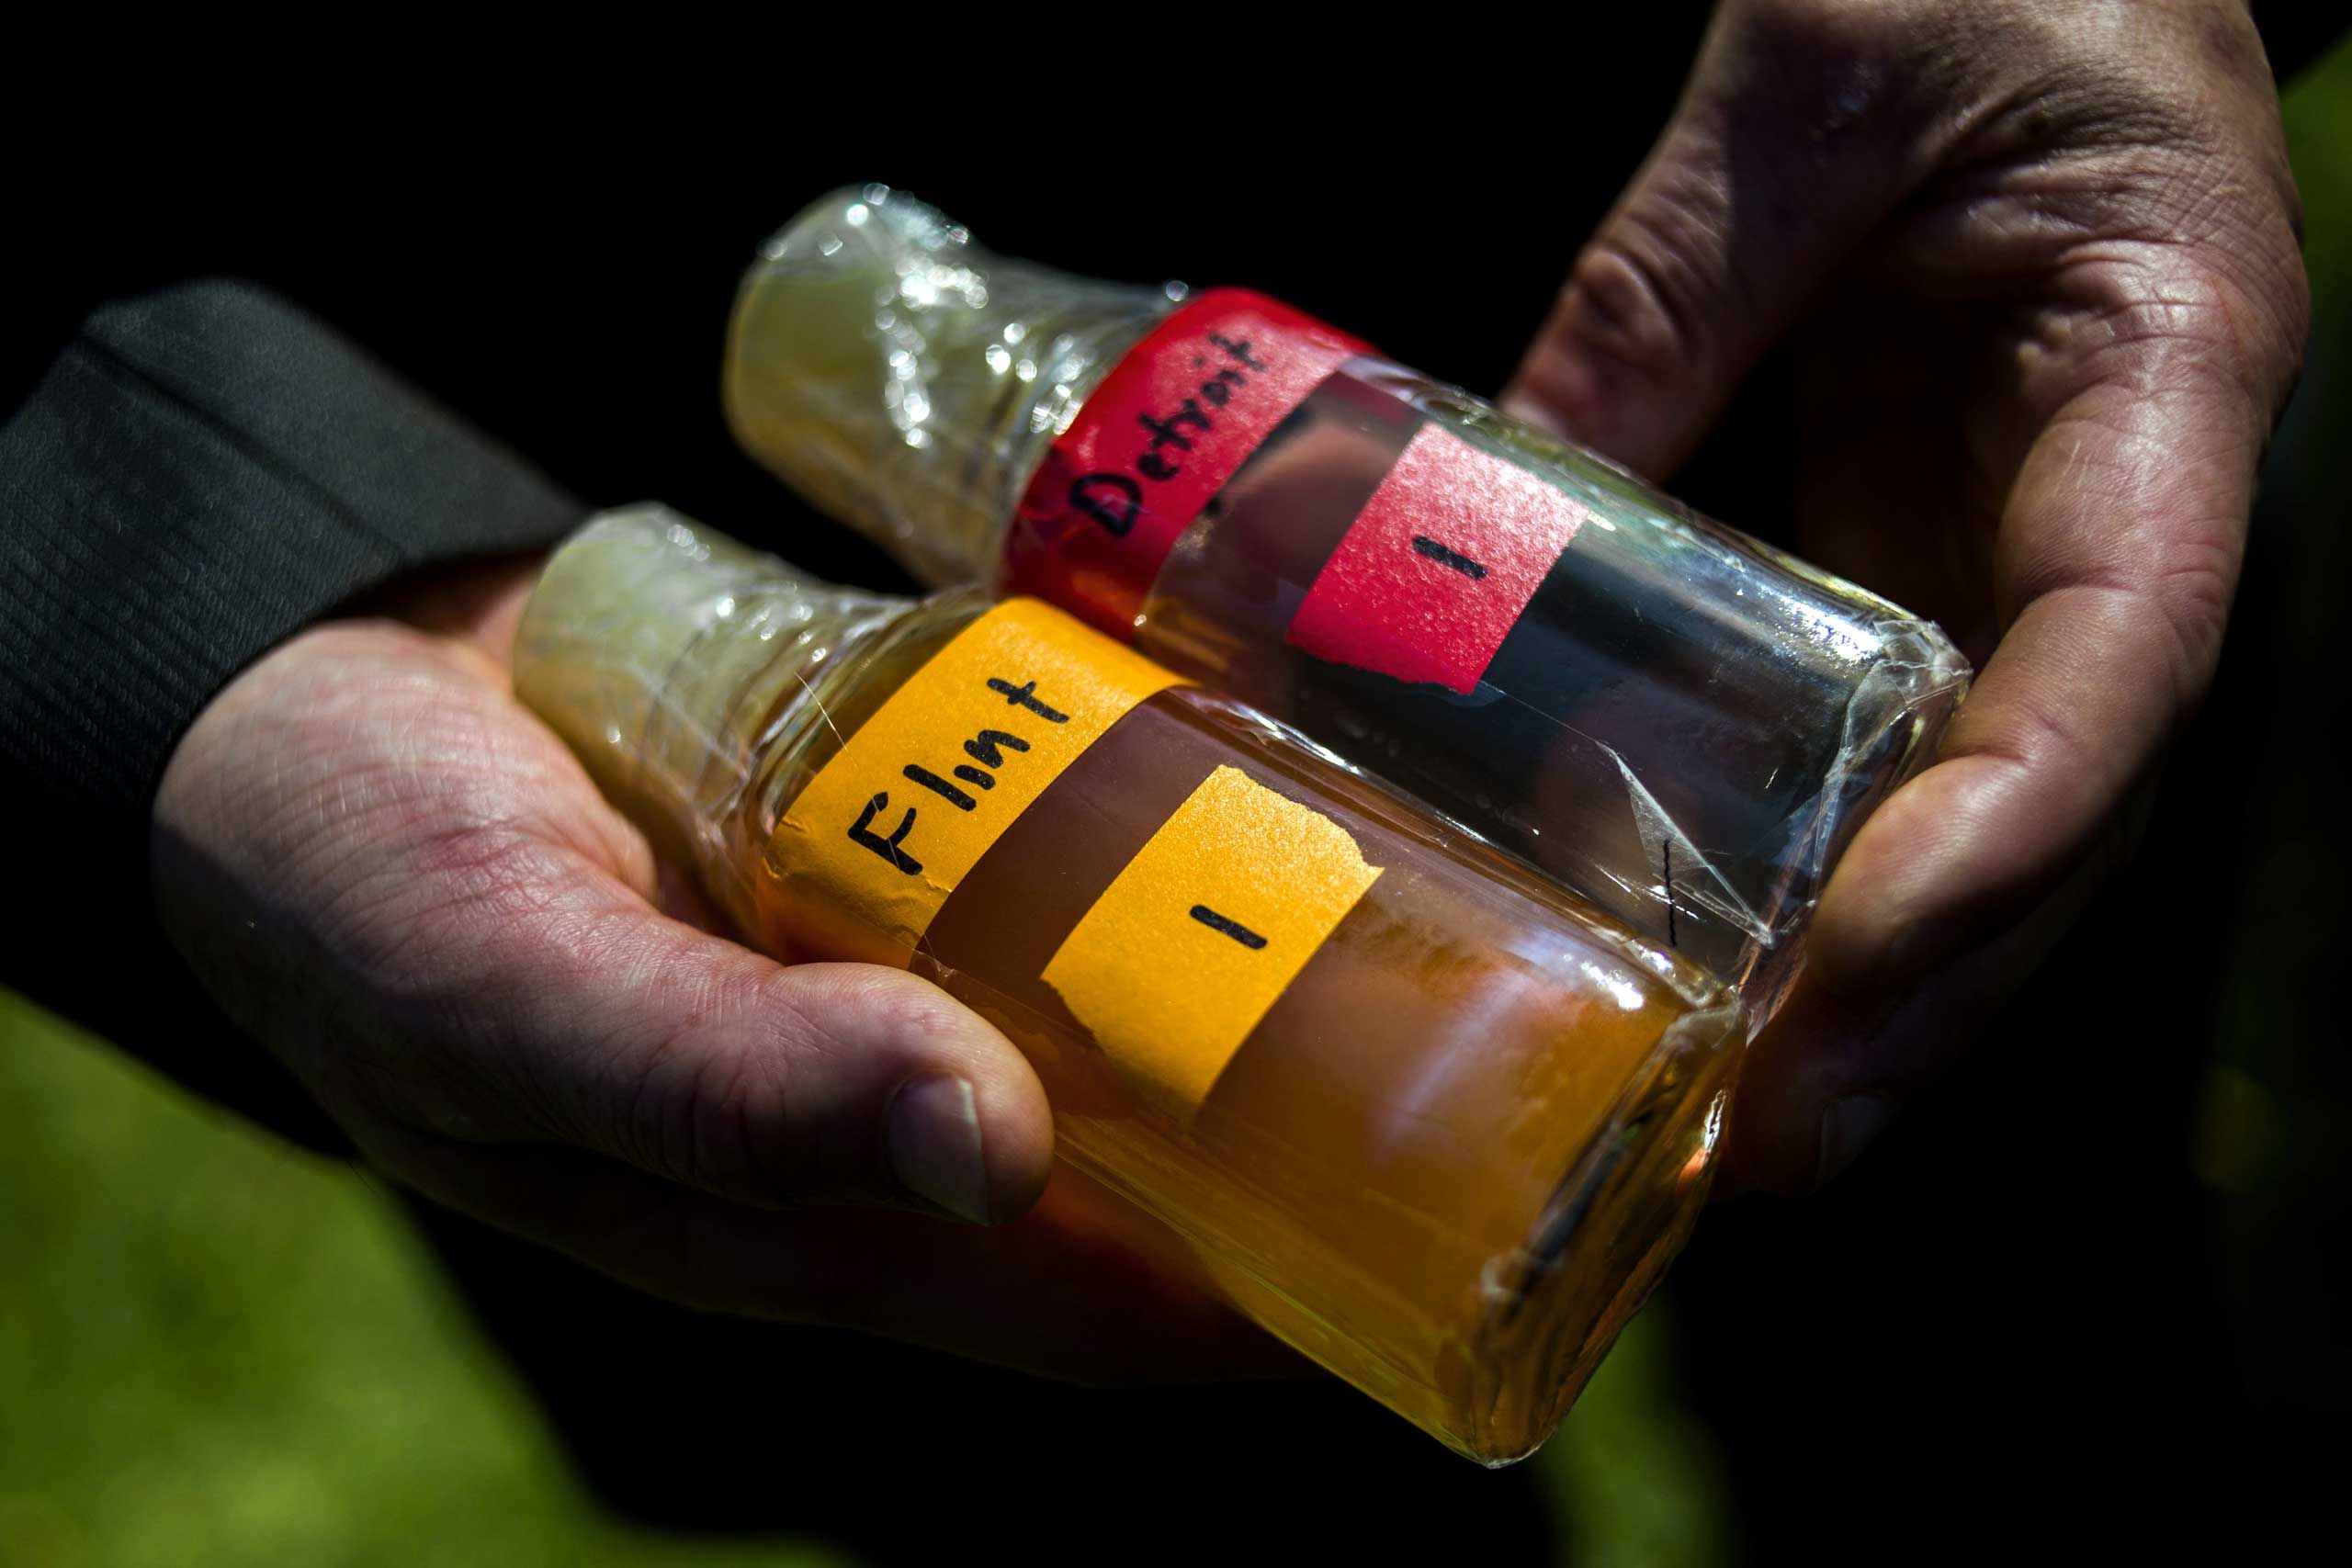 Virginia Tech professor Marc Edwards shows the difference in water quality between Detroit and Flint after testing, giving evidence after more than 270 samples were sent in from Flint that show high levels of lead during a news conference on Sept. 15, 2015 outside of City Hall in downtown Flint, Mich.